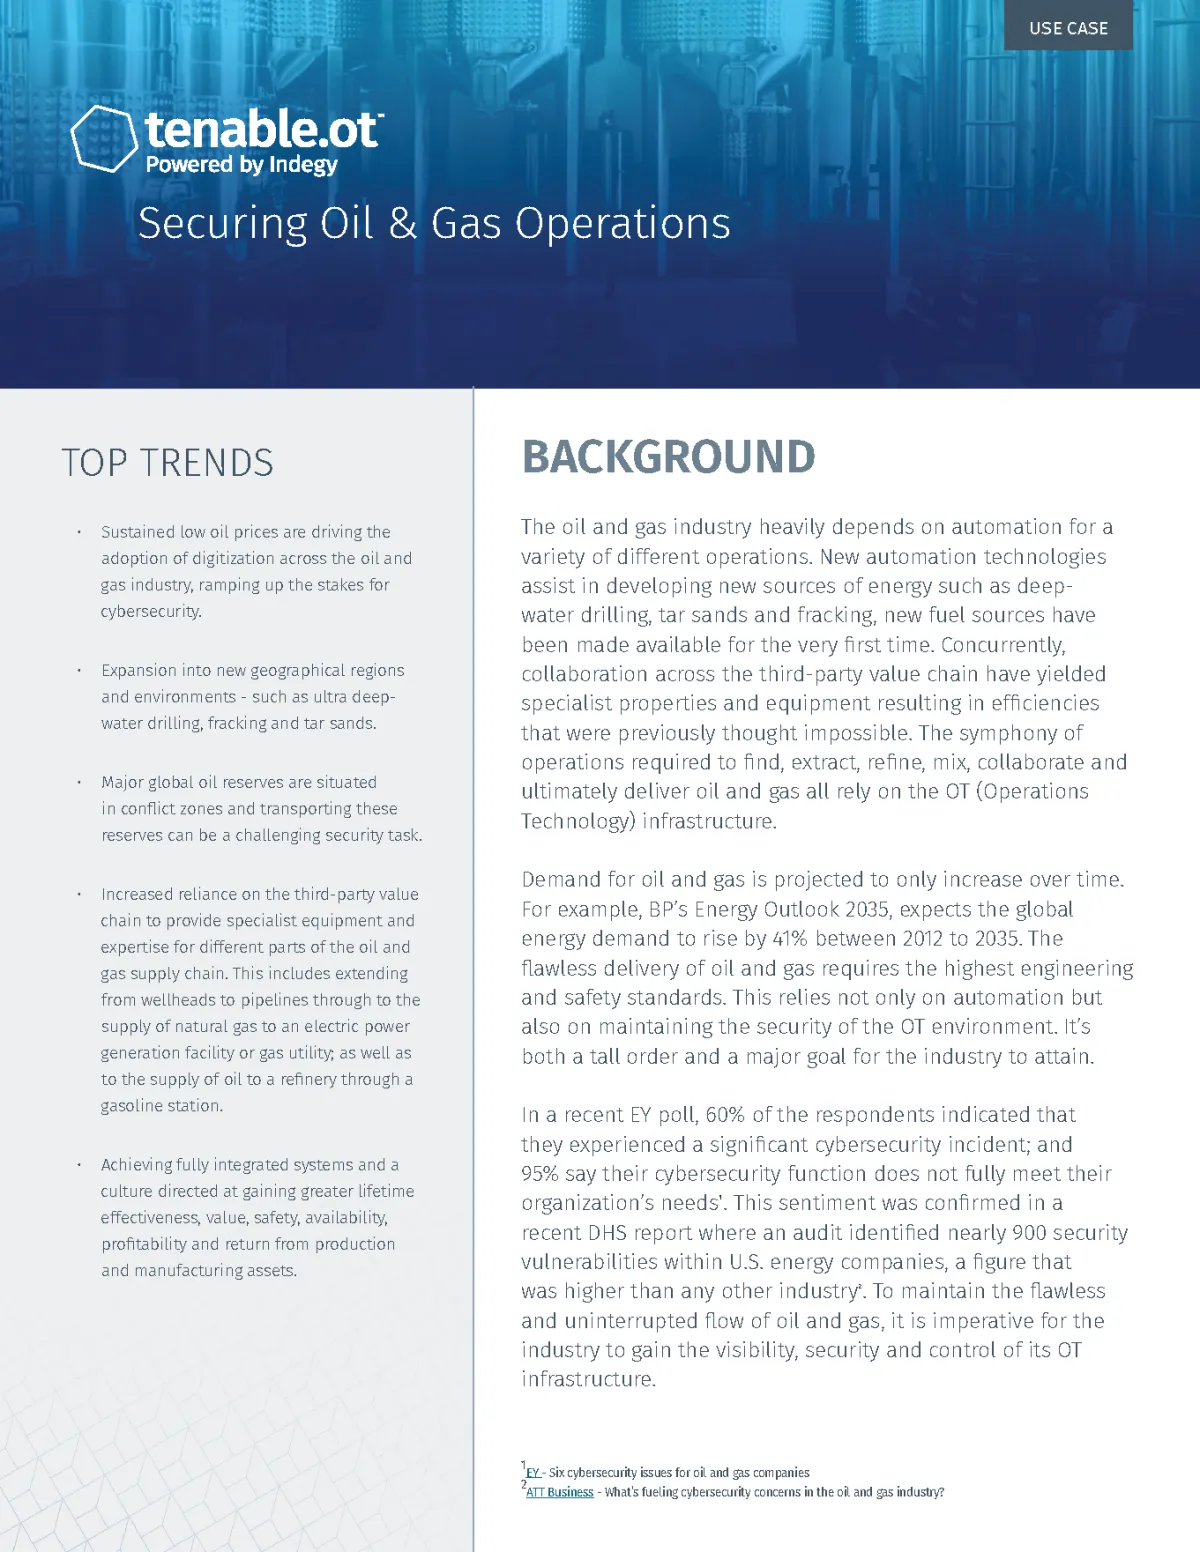 Case Study: Securing Oil & Gas Operations with Tenable.ot